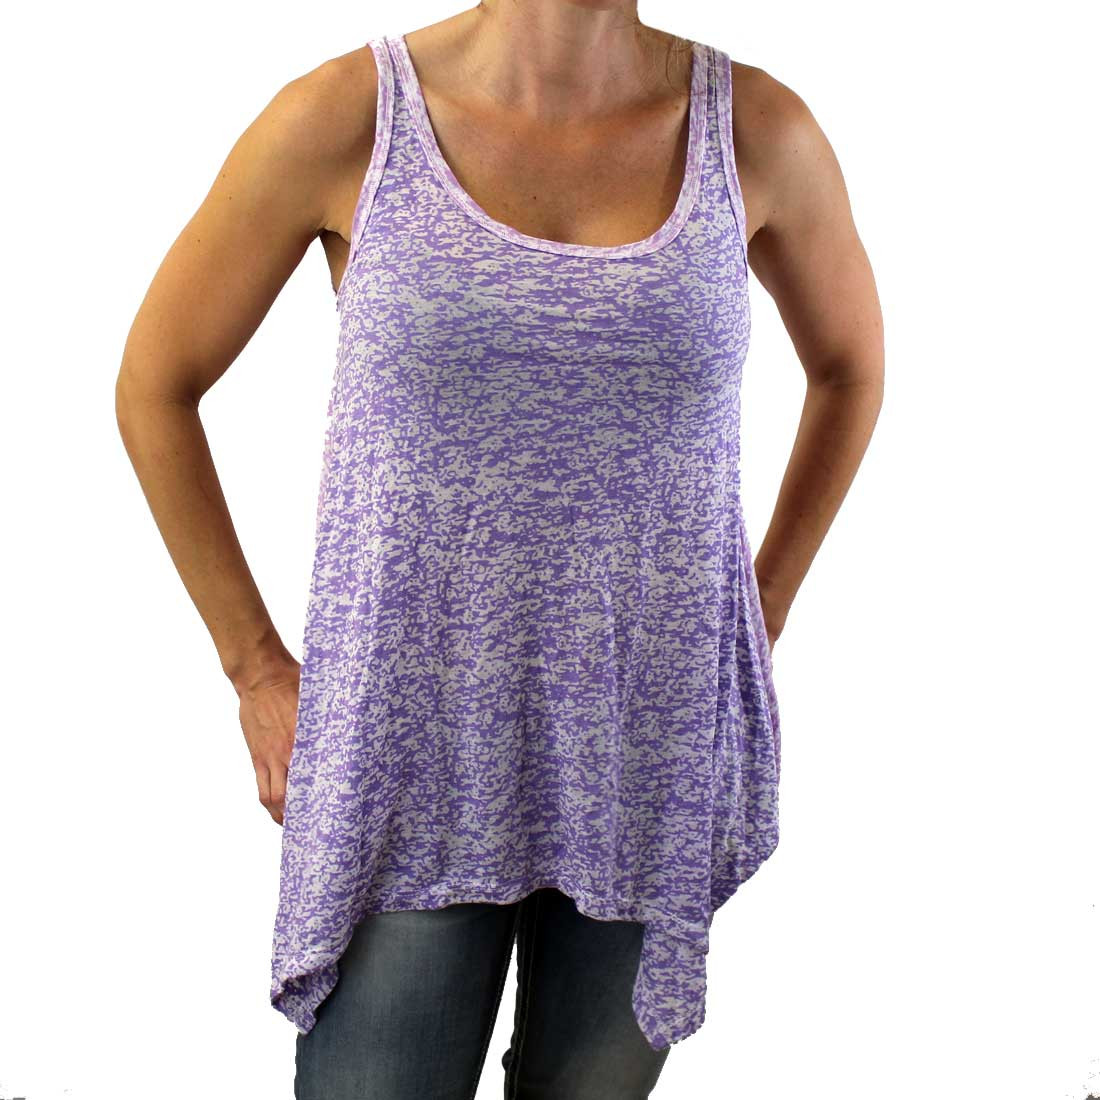 Lavender and pink tank top.